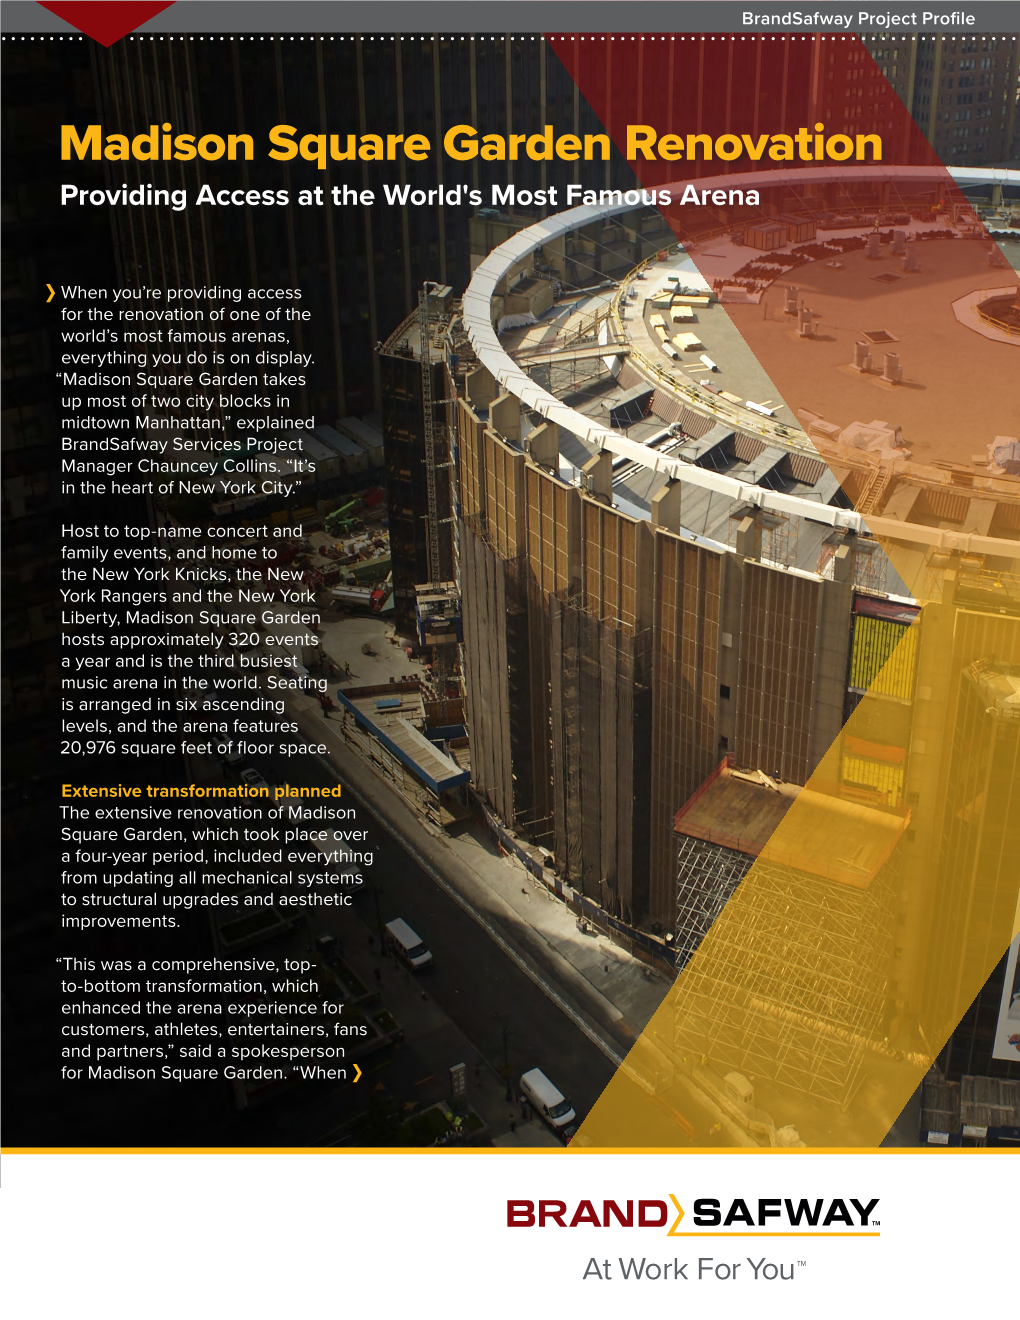 Madison Square Garden Renovation Providing Access at the World's Most Famous Arena